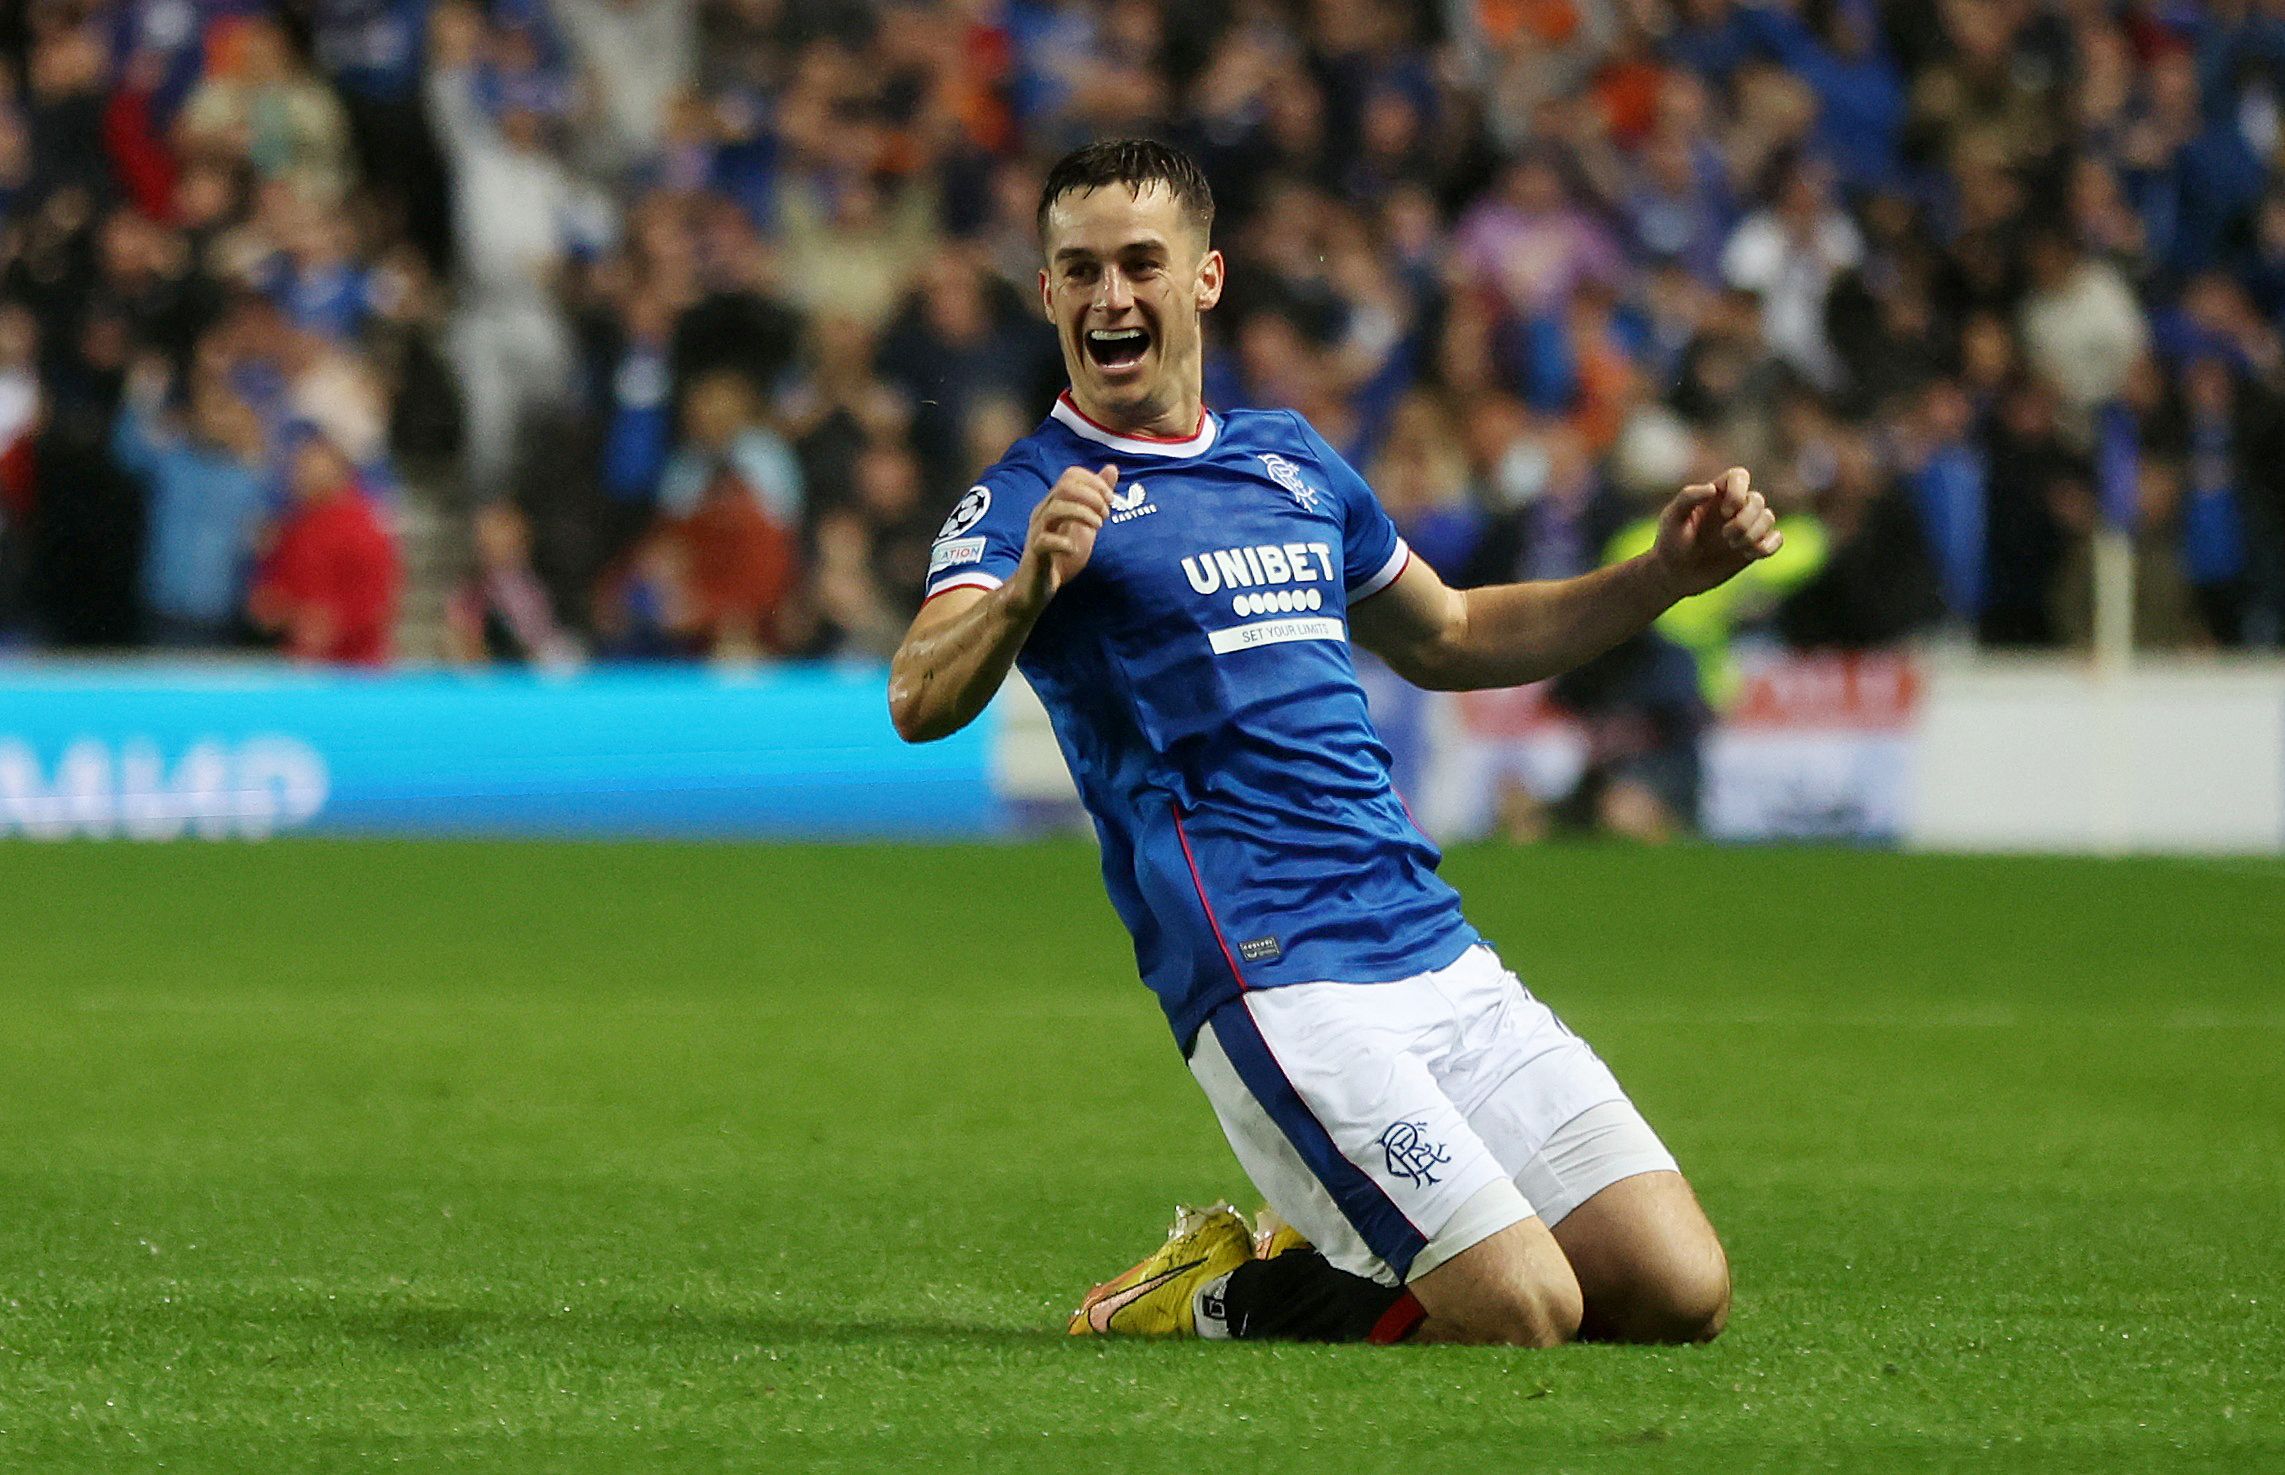 Rangers: Tom Lawrence injury setback a ‘massive blow’ -Follow up